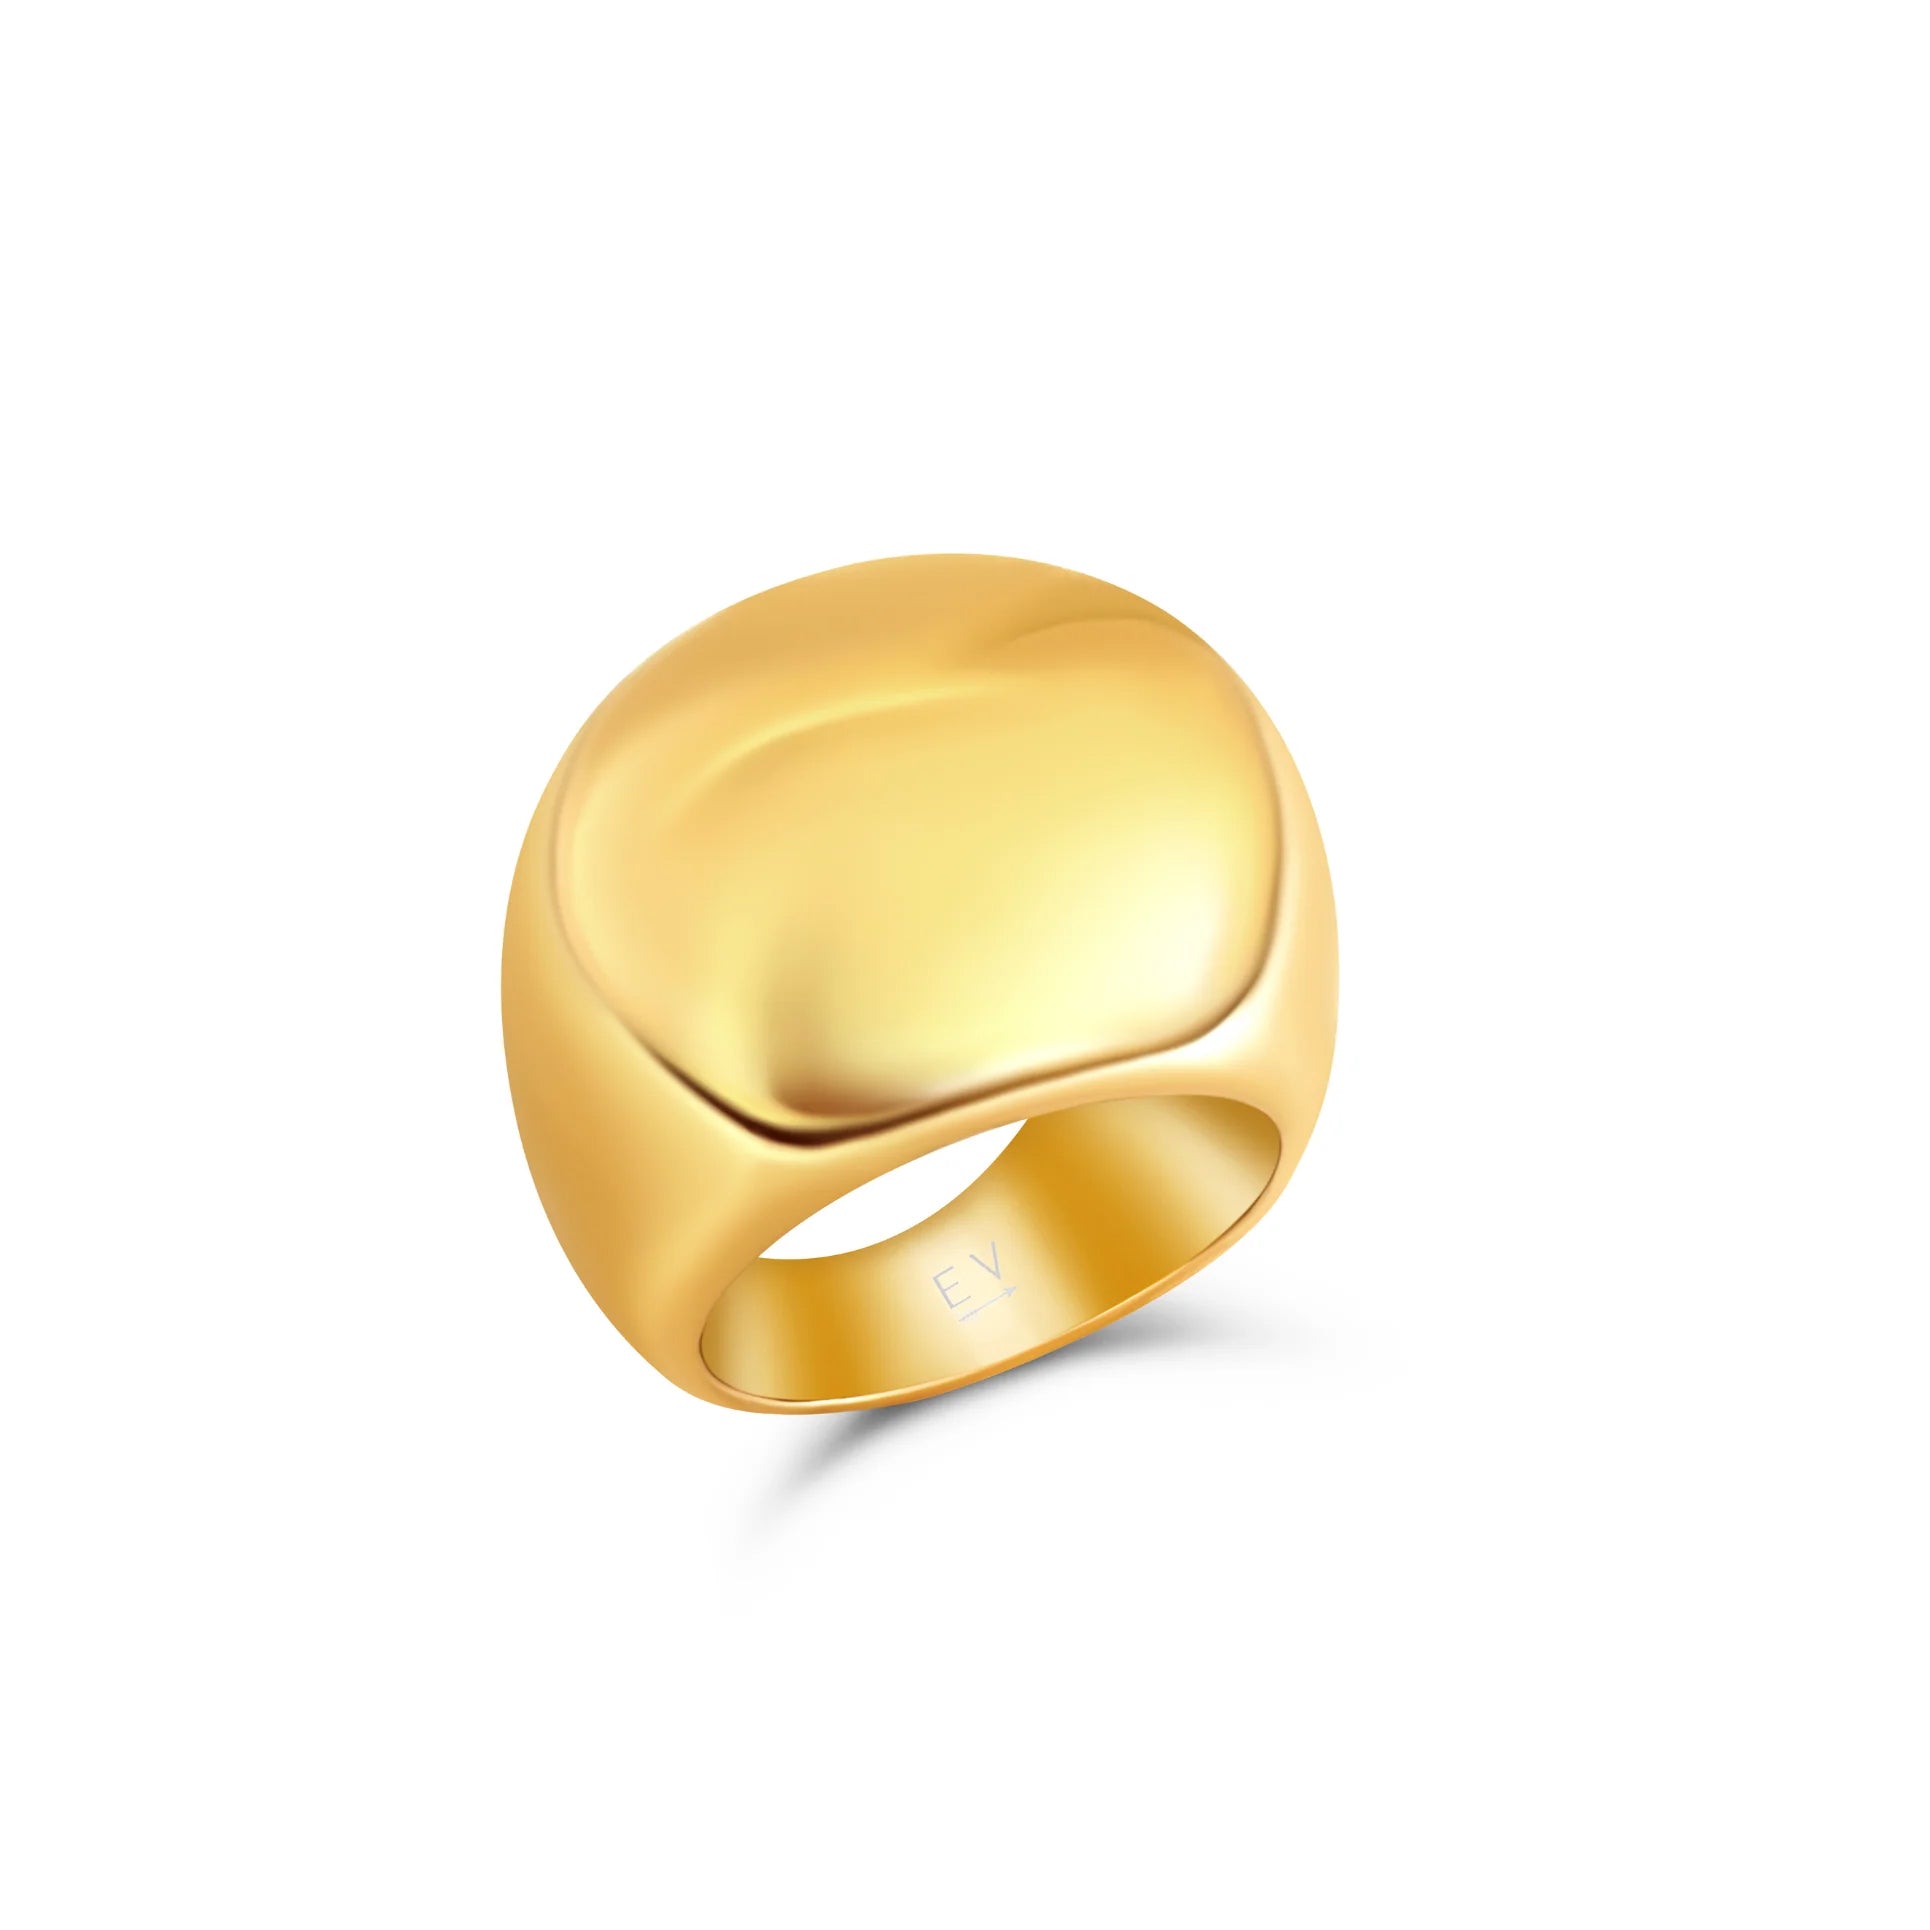 Ellie Vail Oversized Dome Ring Gold 8